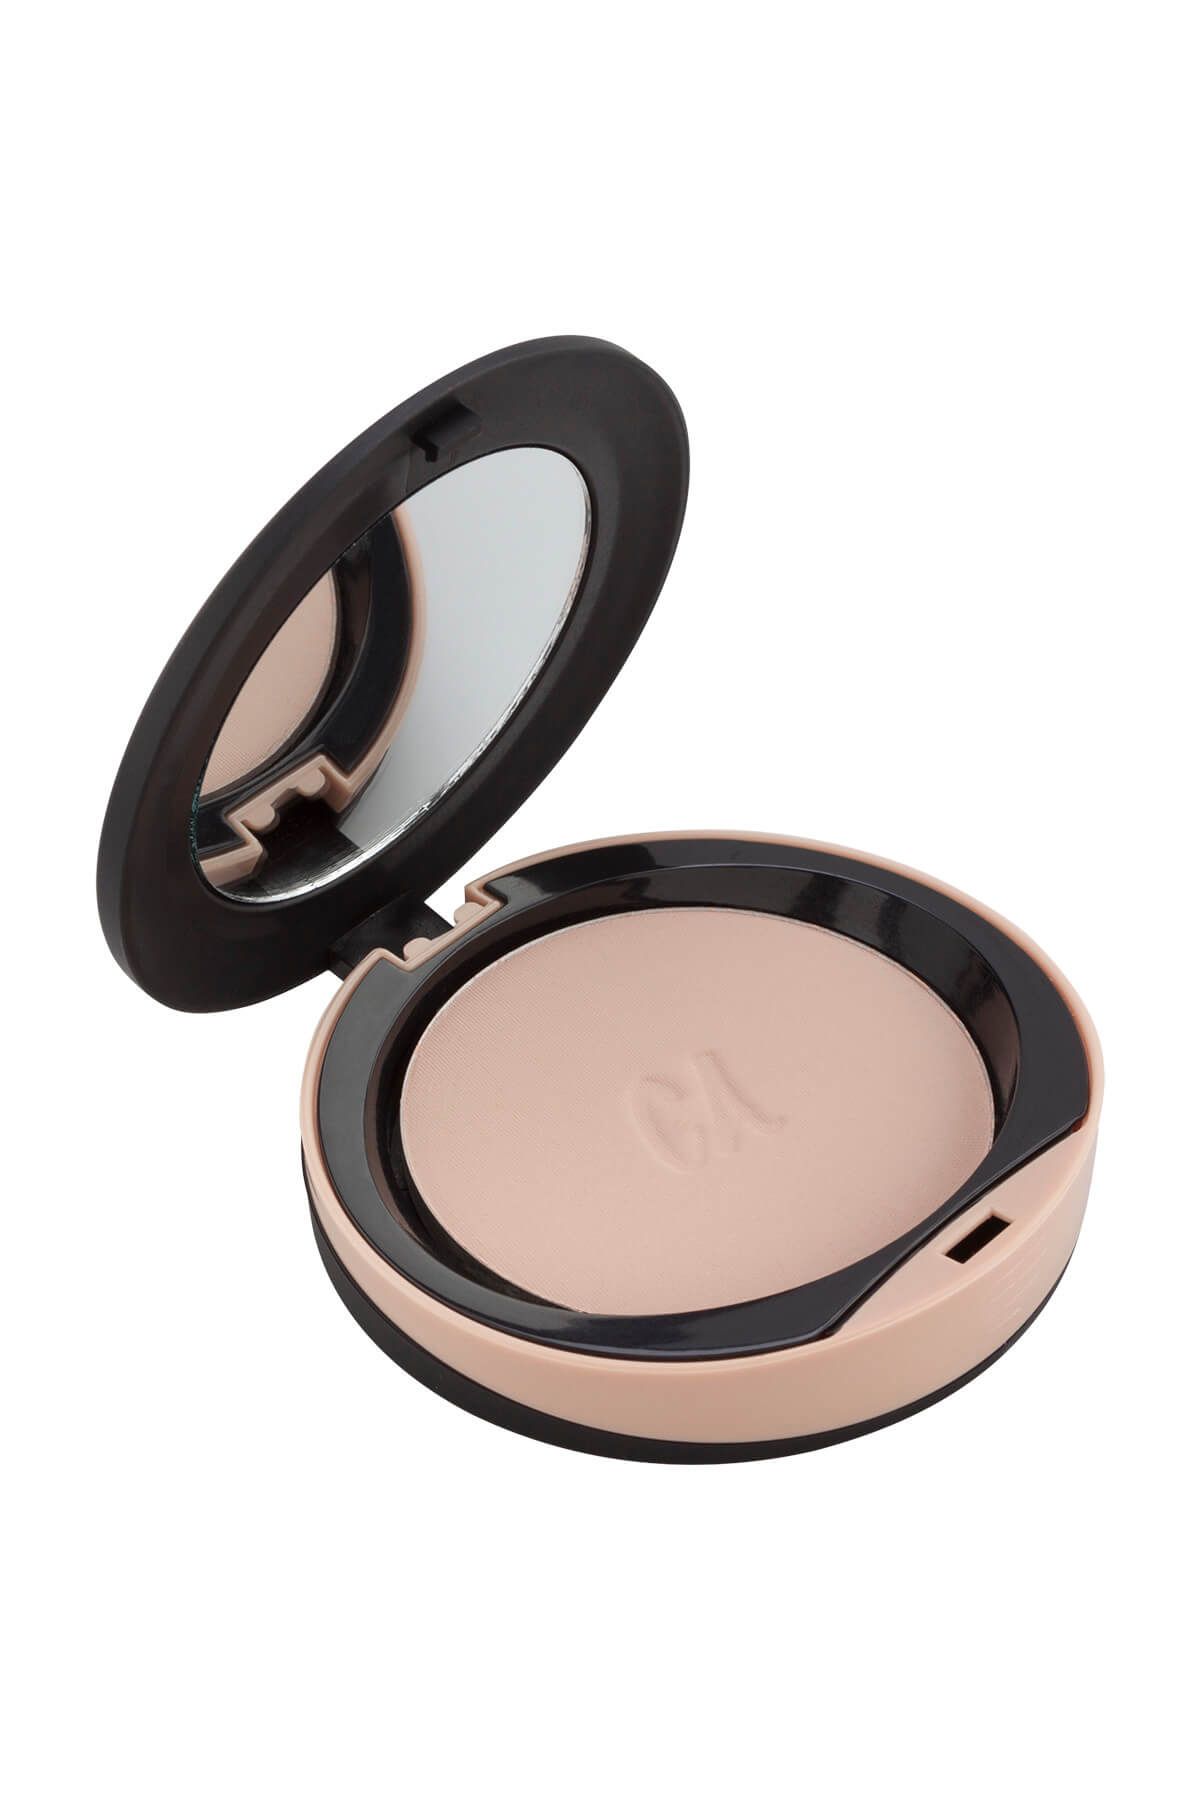 Catherine Arley Mineral Mat Pudra - Mineral Matte Compact Powder M03 8691167529354